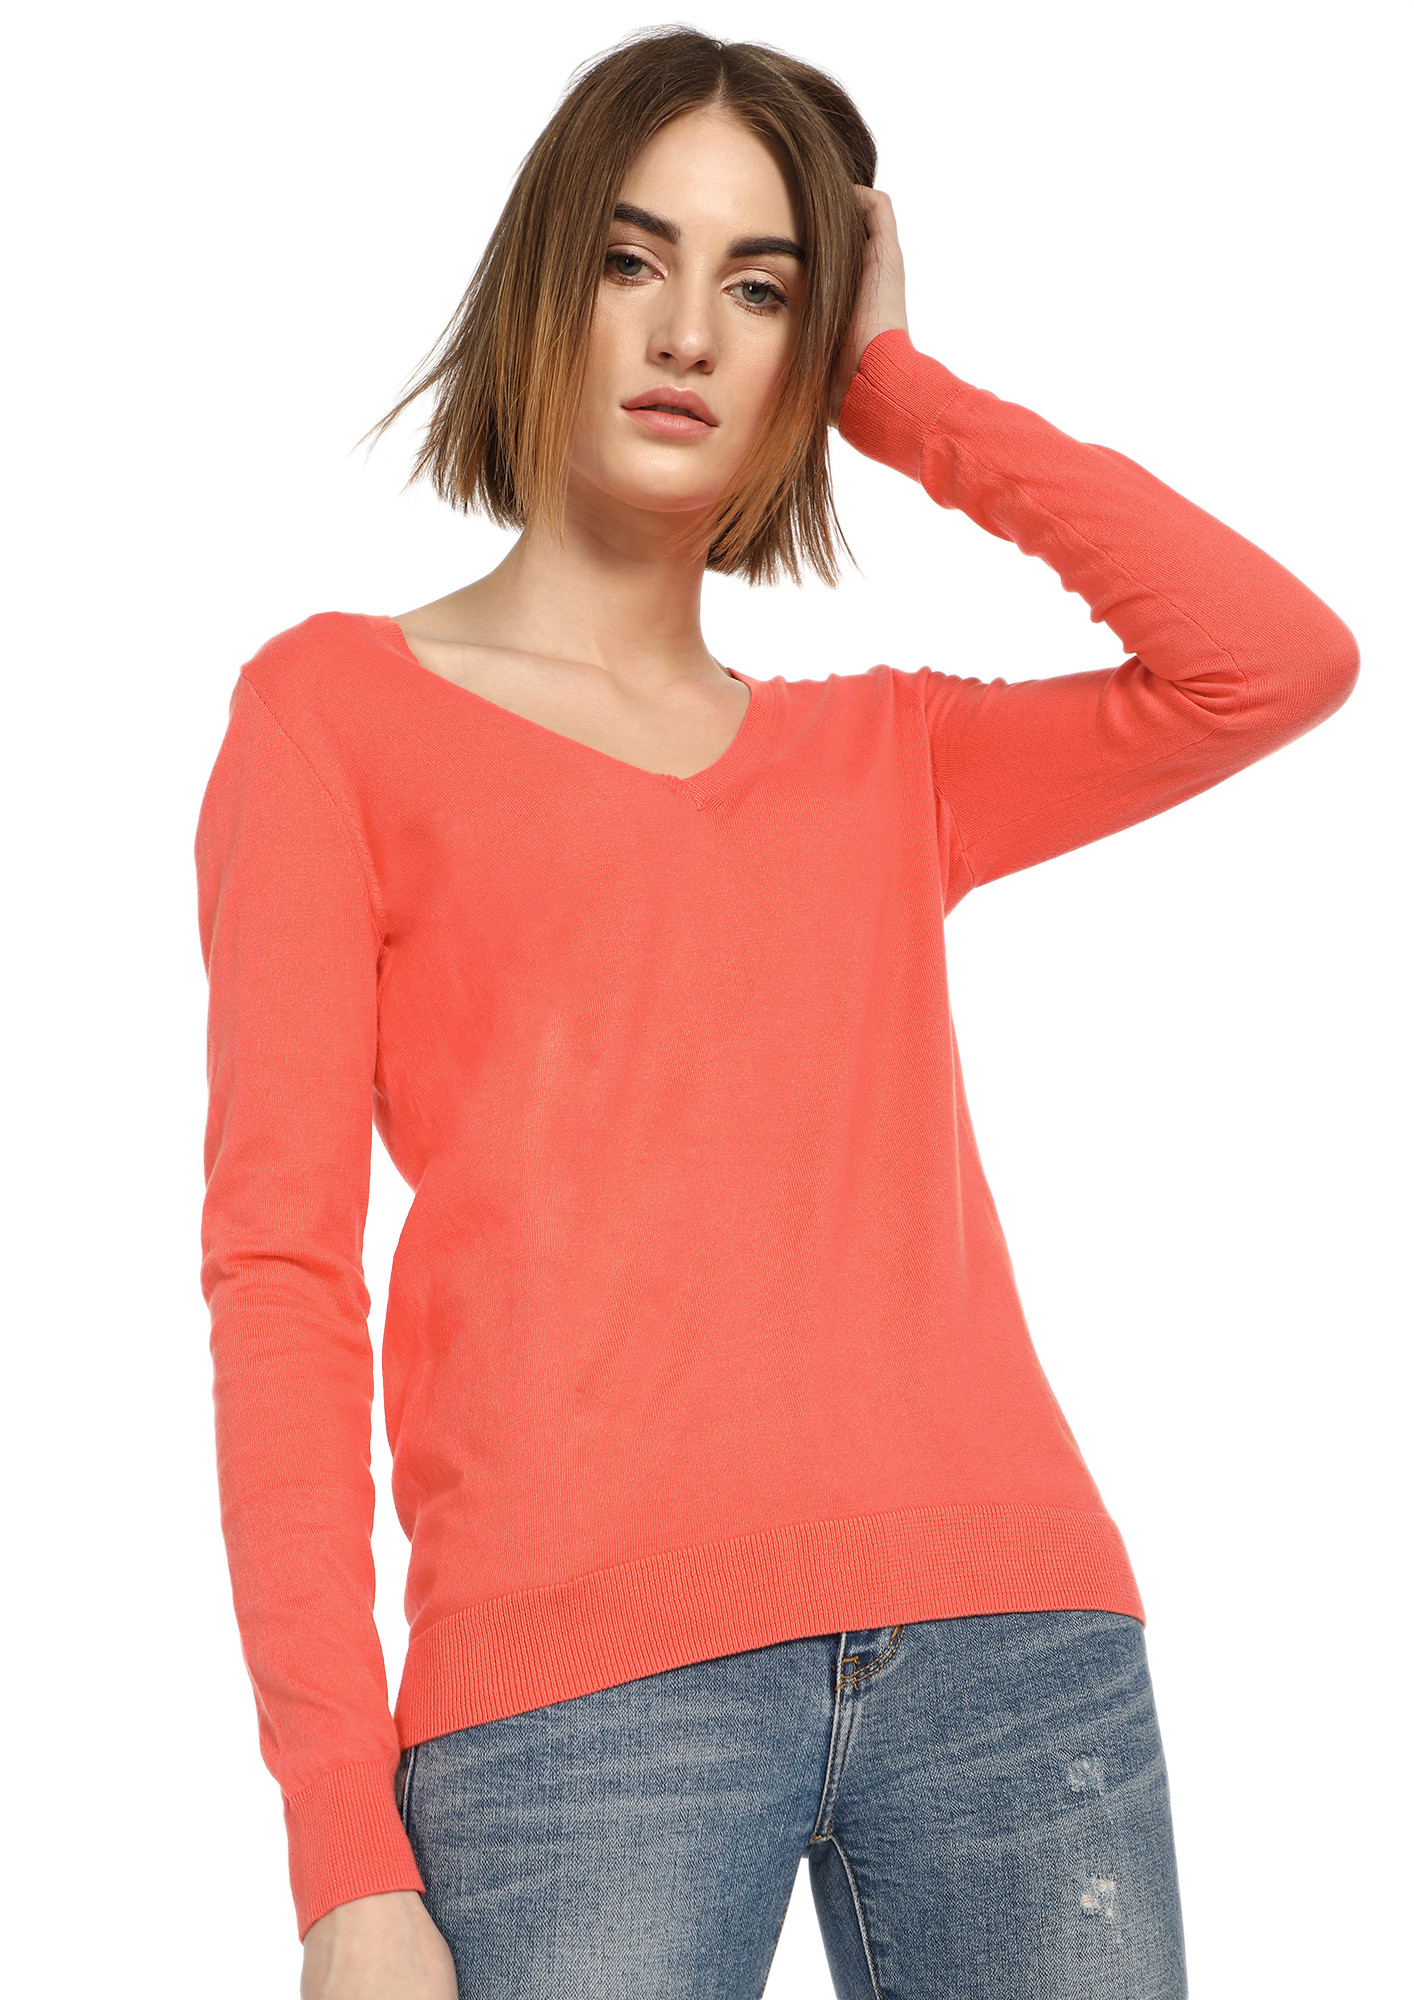 CAN YOU RIB-PEAT CORAL RED RIBBED T-SHIRT